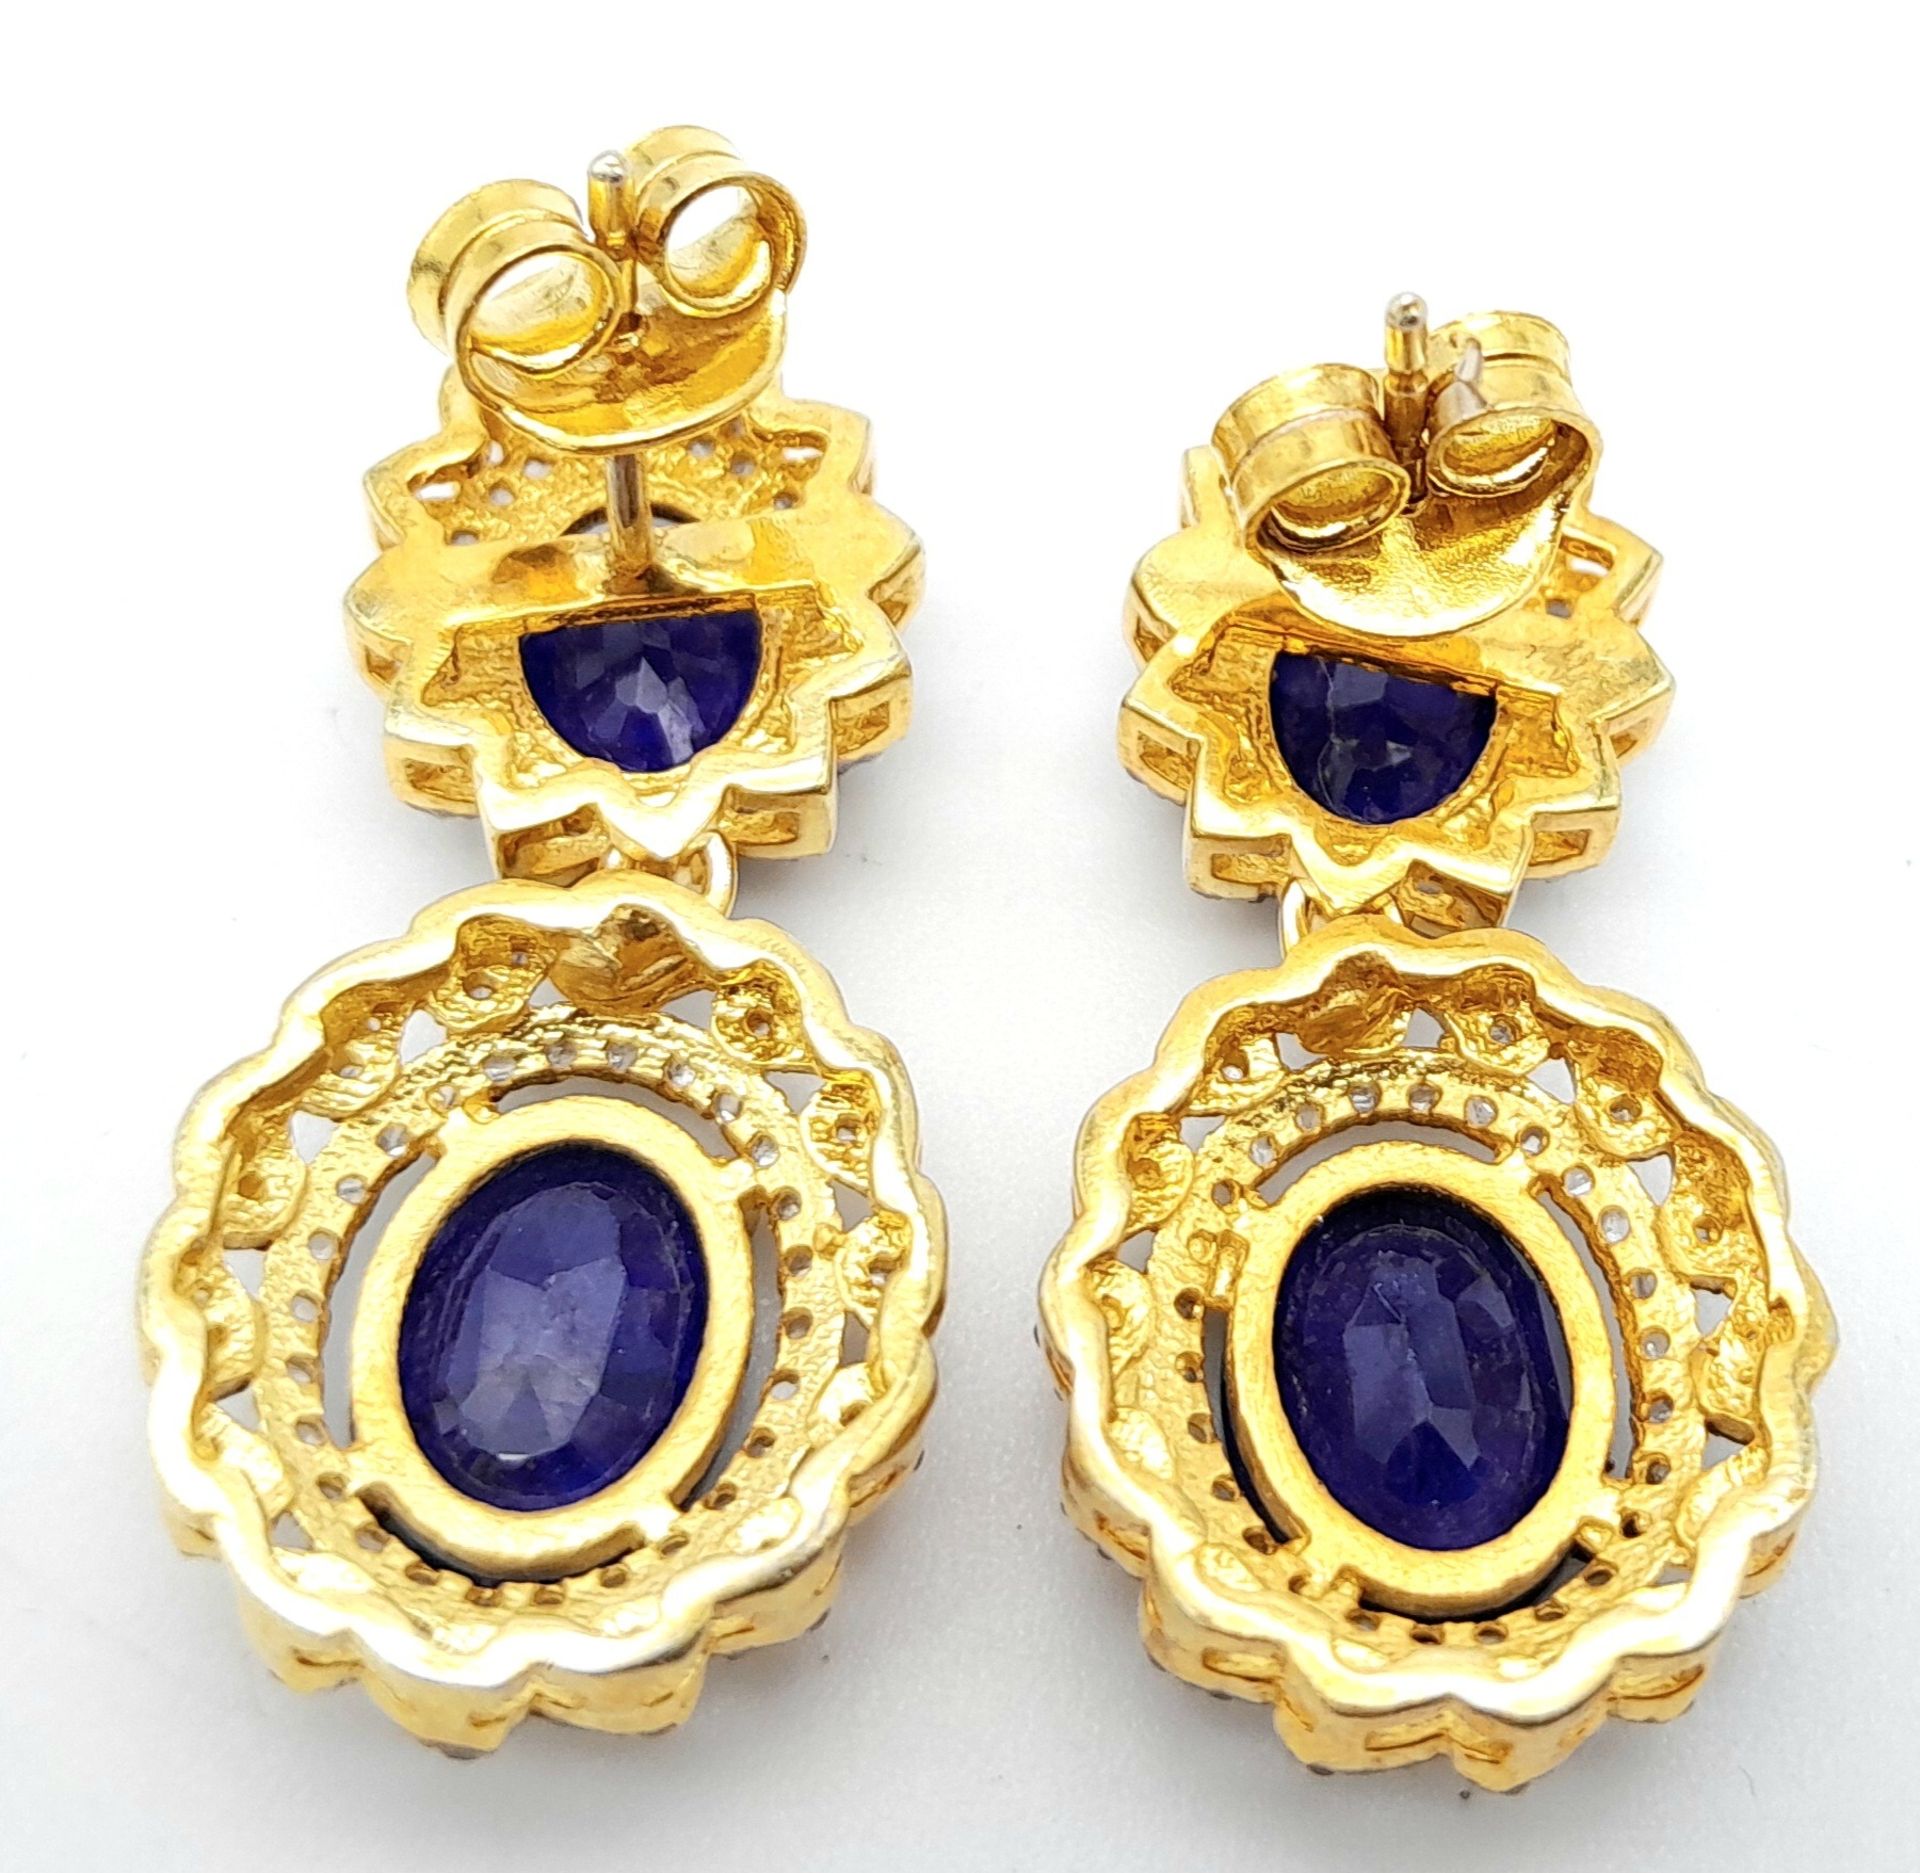 A Pair of Blue Sapphire Gemstone Drop Earrings with Diamond Surrounds. Set in gilded 925 Silver. - Image 2 of 3